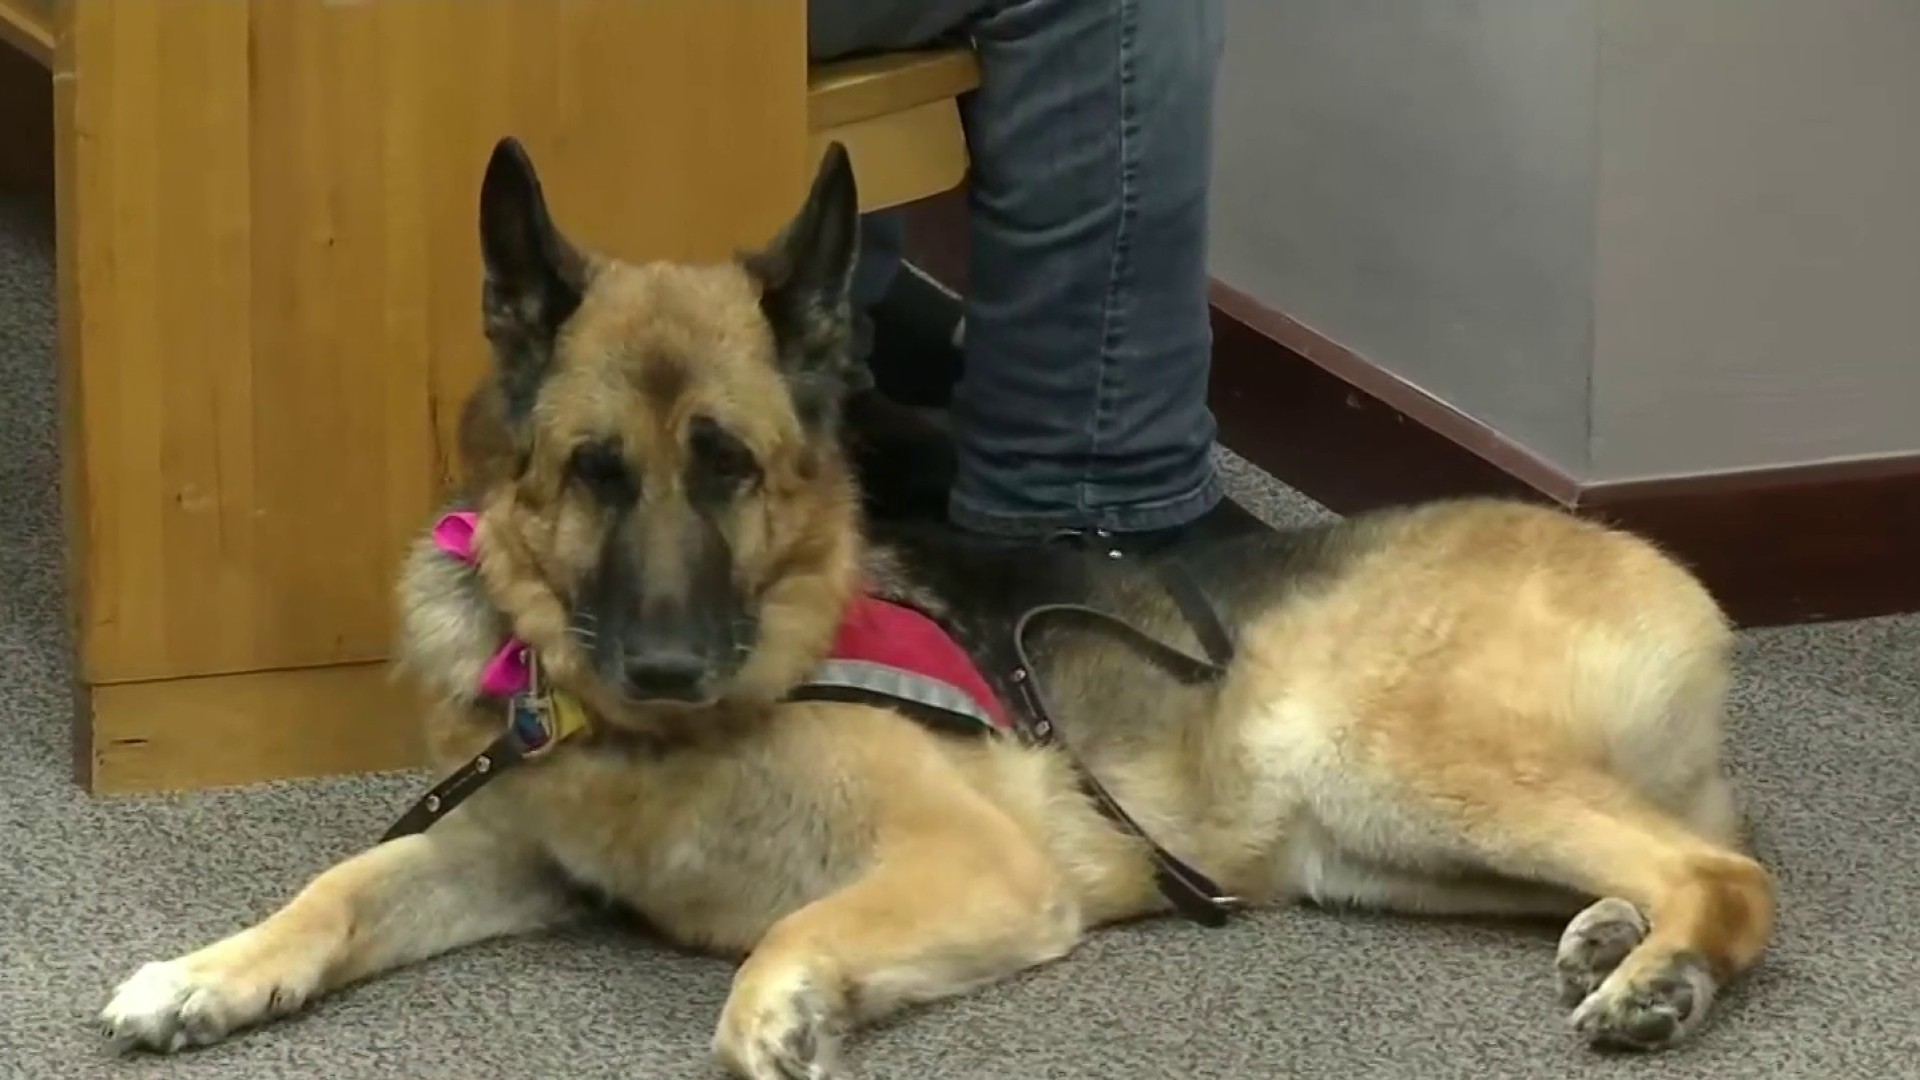 Florida groomer who broke service dog's tail sentenced to 180 days in jail, 3  years probation